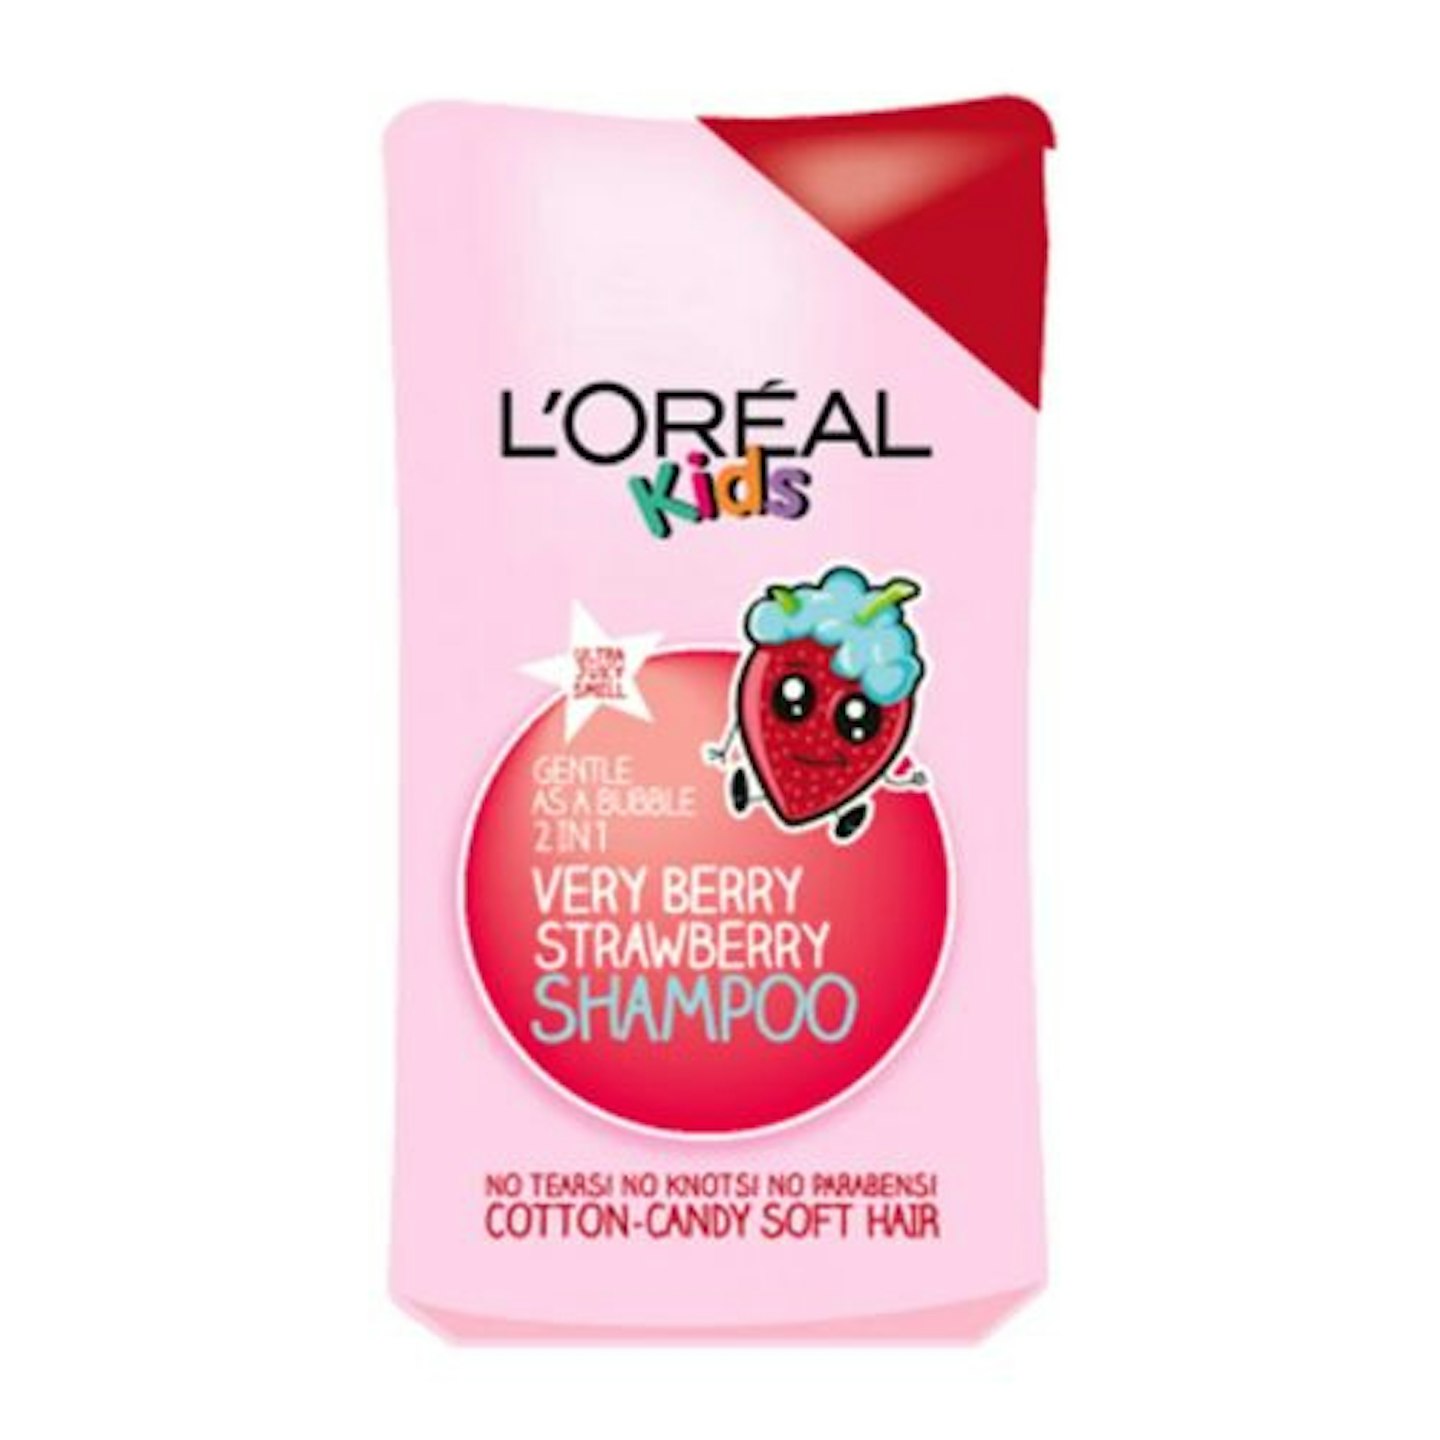 L’Oreal Kids Extra Gentle 2in1 Very Berry Strawberry Shampoo